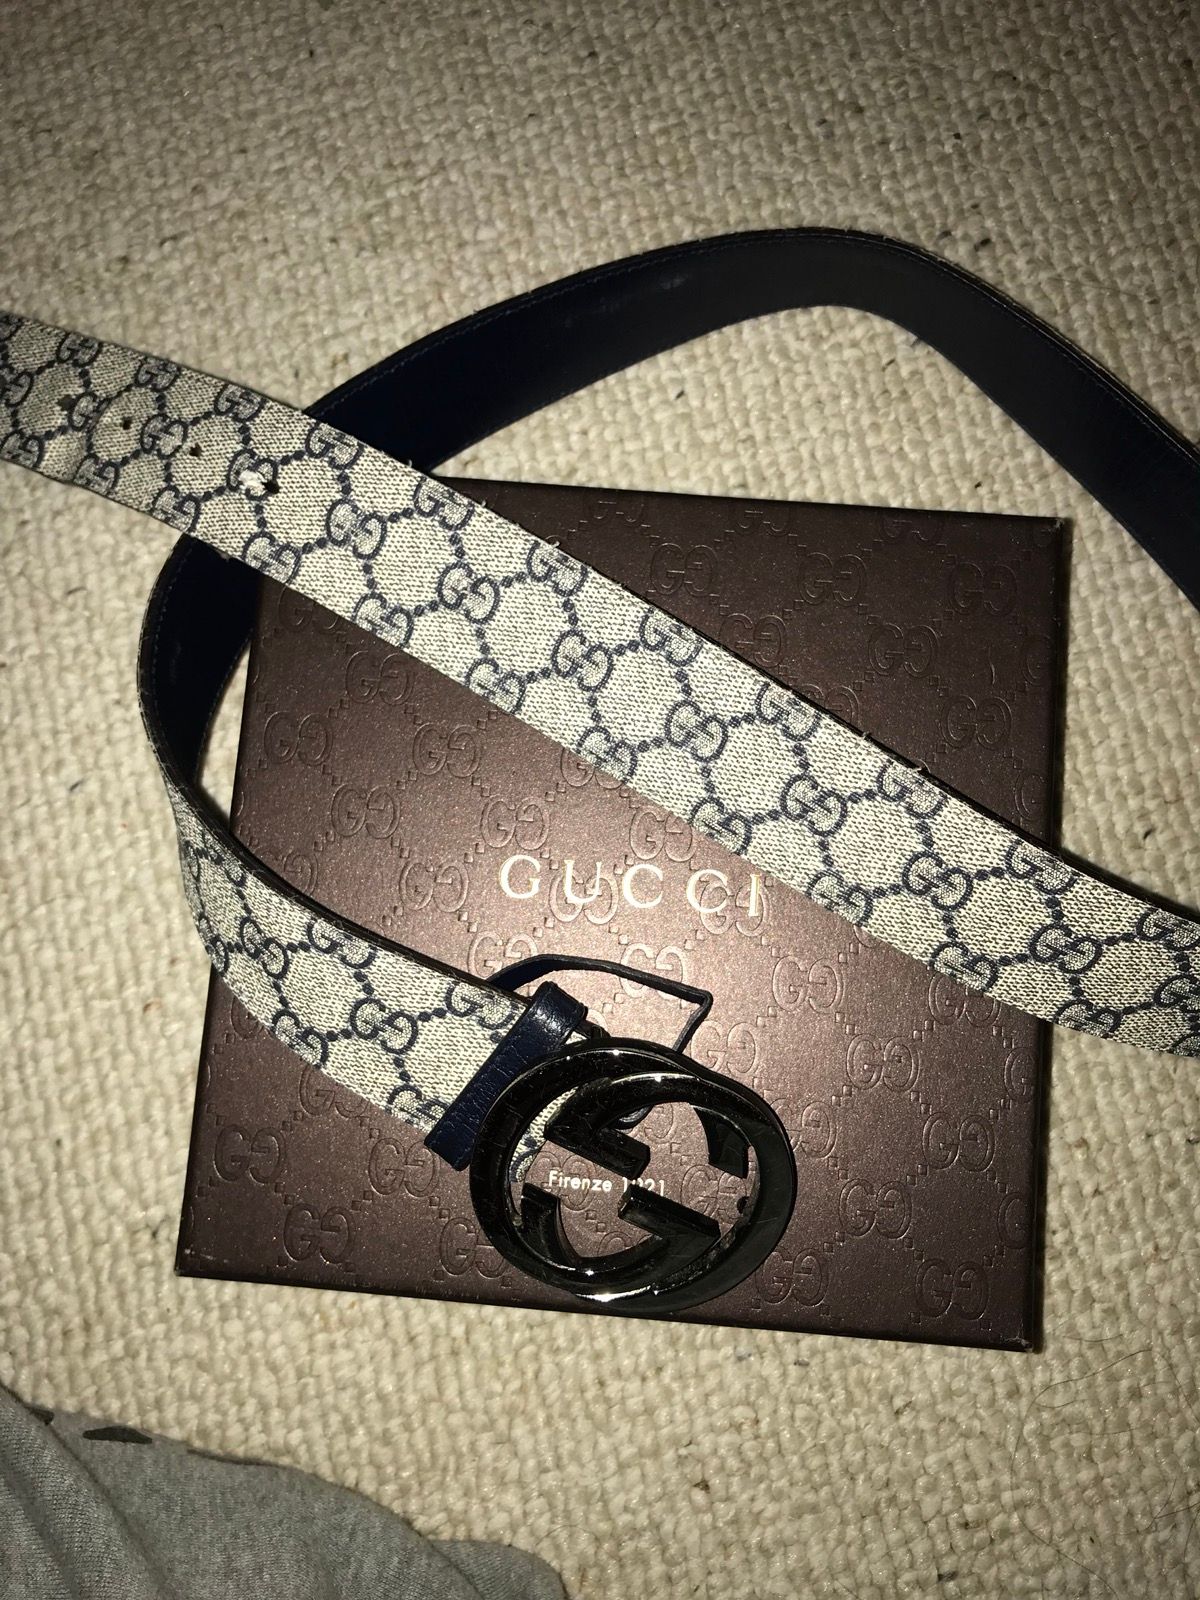 Gucci Men's Blue GG Supreme Belt With G Buckle DESCRIPTION: The belt is new  and intact. It is 3 cm wide and 95 cm long. I will send it with all the